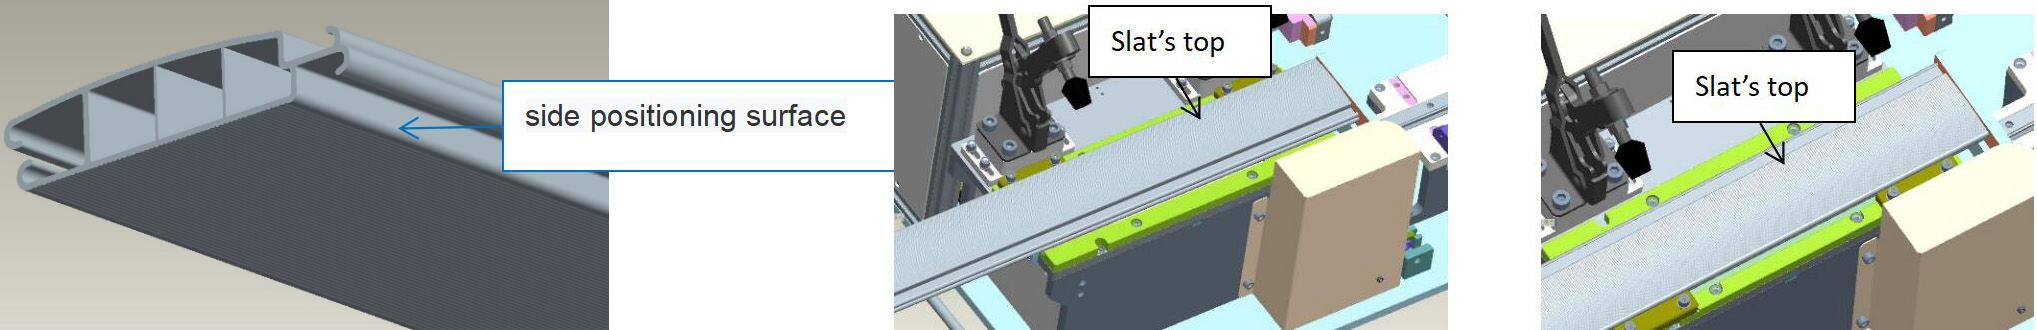 Placement Of Slat A